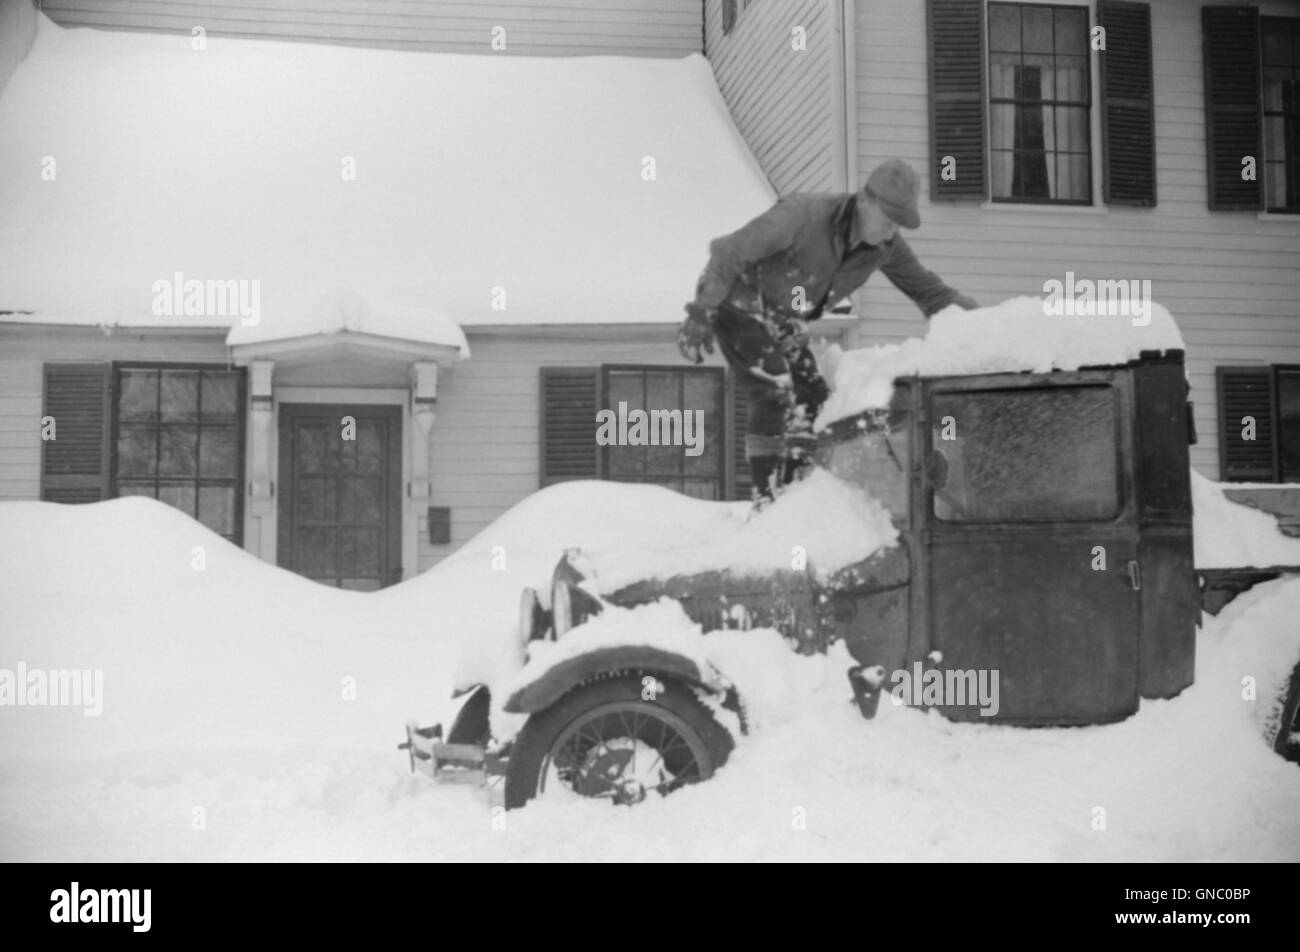 Man Clearing Snow from Truck after Heavy Snowfall, Woodstock, Vermont, USA, Marion Post Wolcott for Farm Security Administration, March 1940 Stock Photo